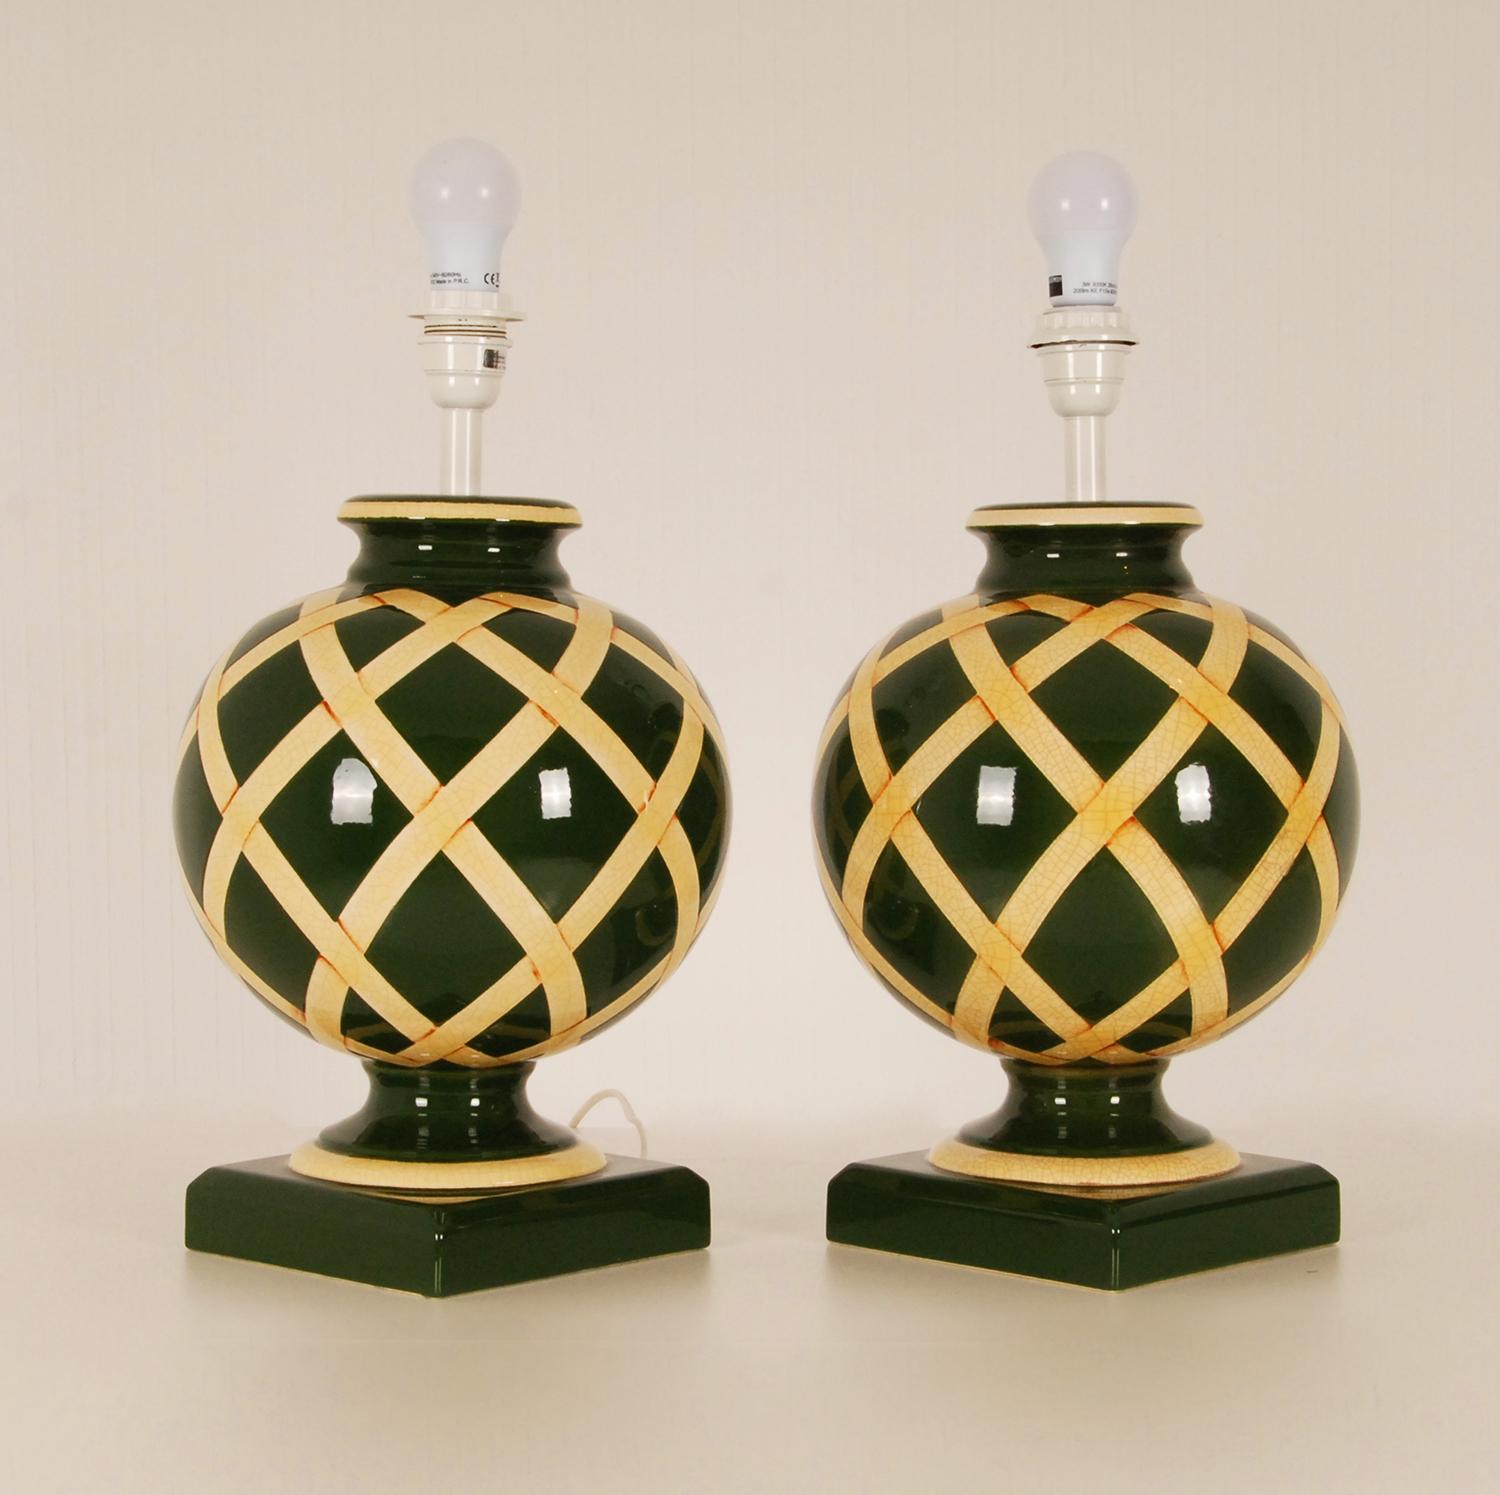 Late 20th Century Vintage French Ceramic Vase Table Lamps Green Beige Argyle Pattern, a Pair For Sale